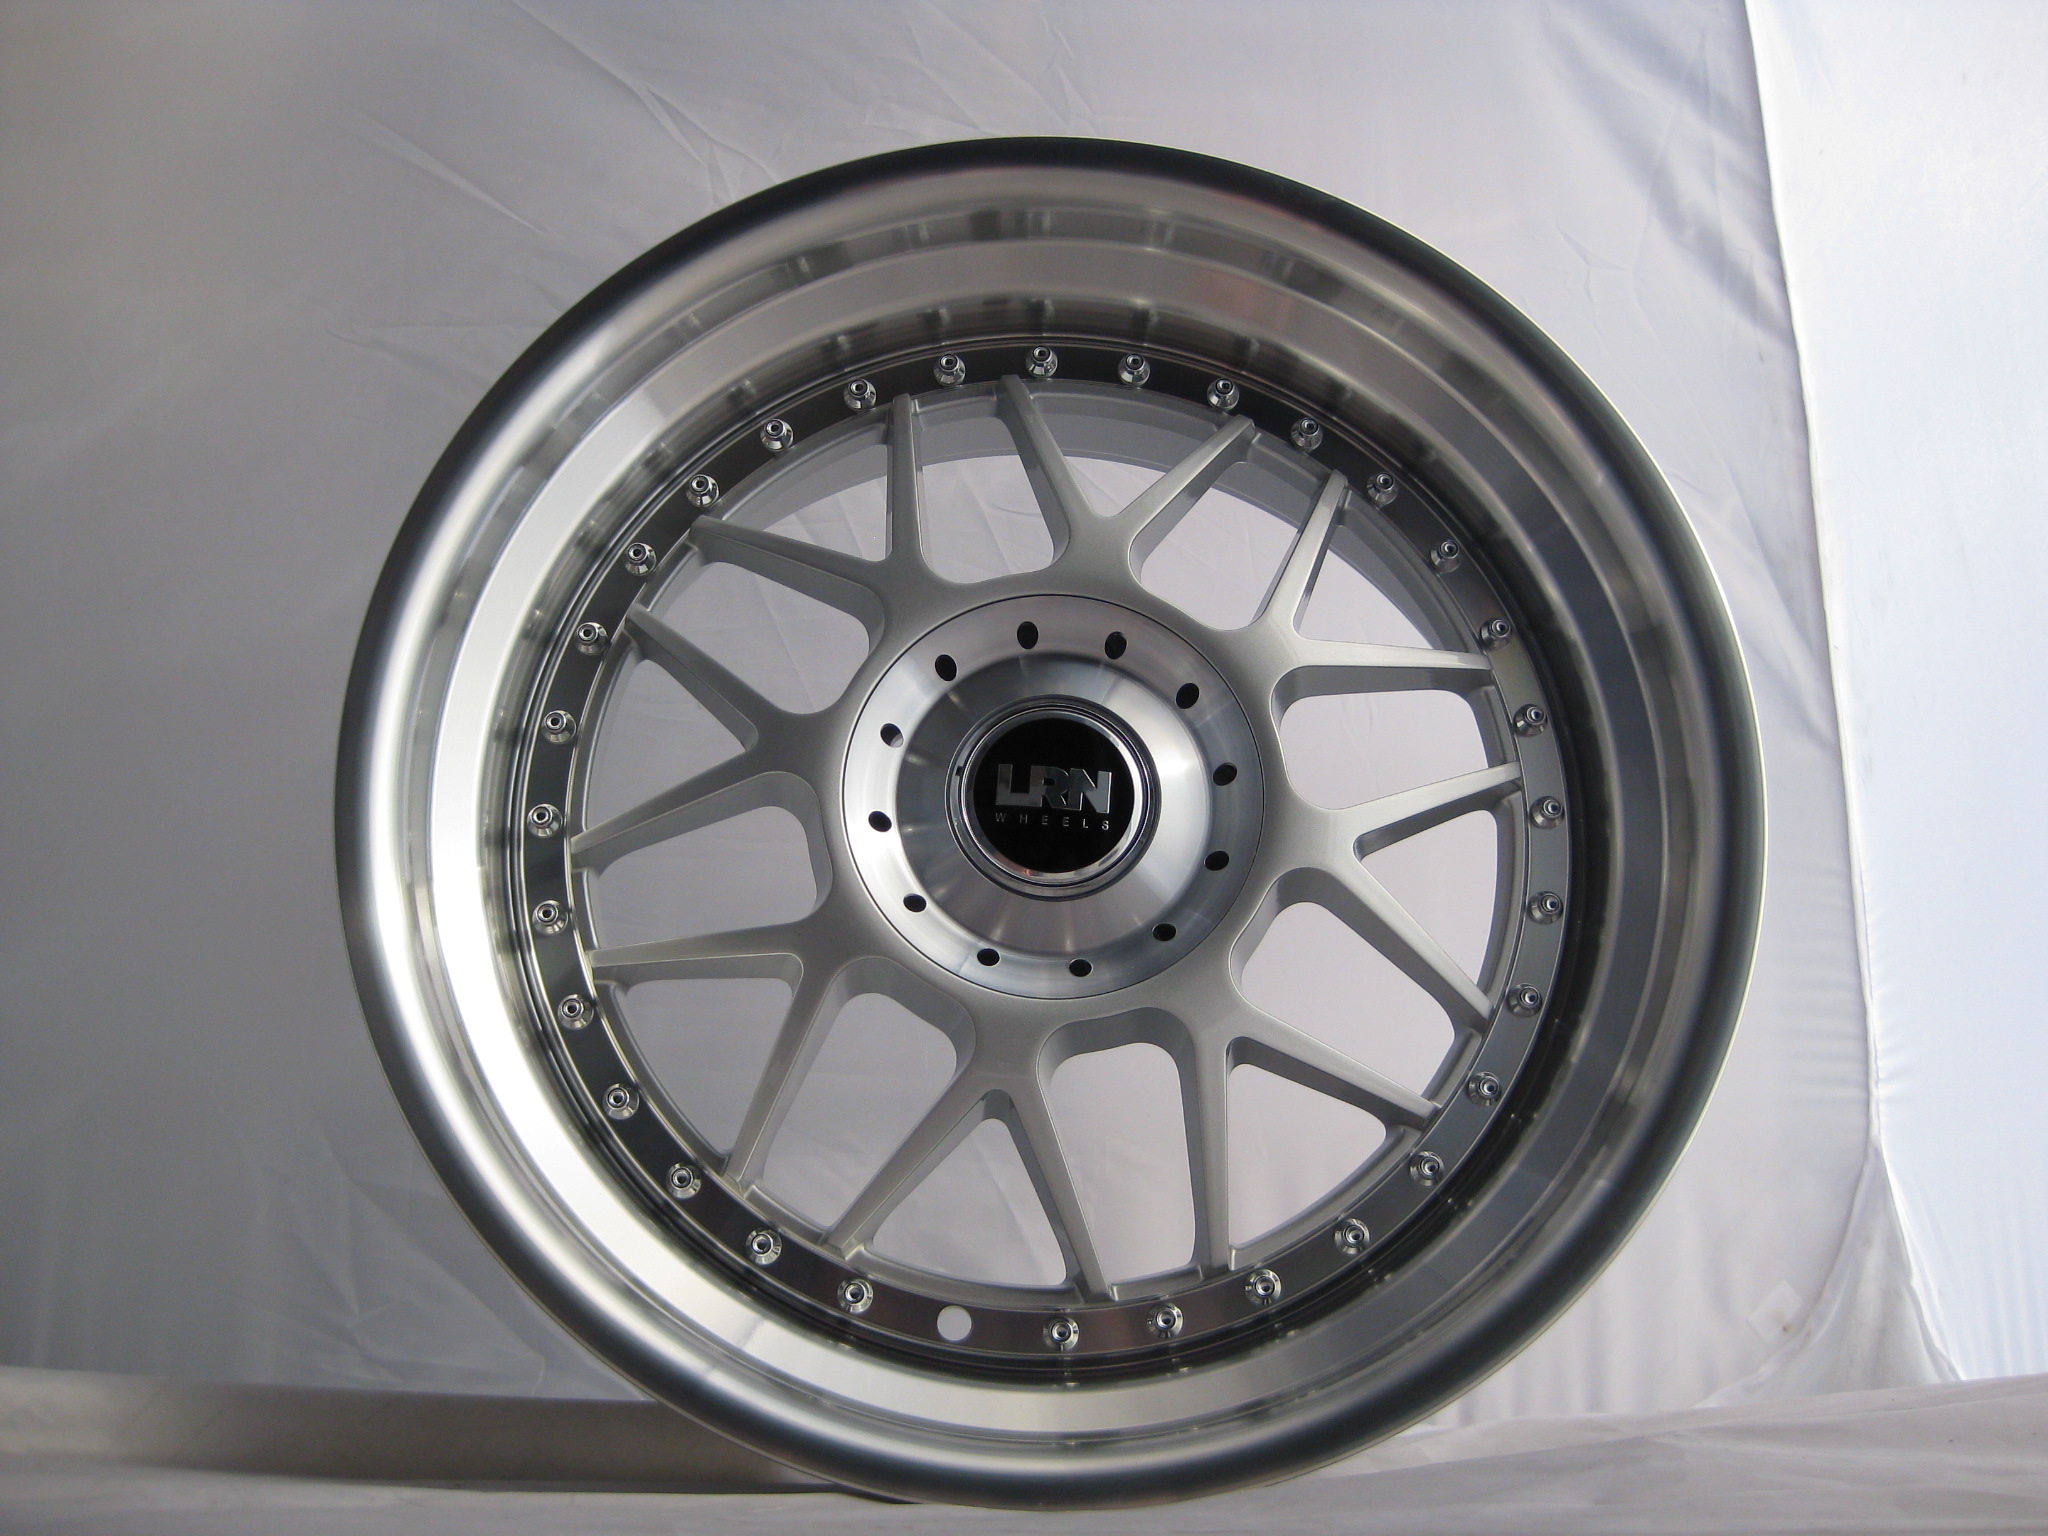 NEW 18  LRN BLITZ ALLOY WHEELS IN SILVER WITH POLISHED STEPPED DISH  DEEPER 9  REAR